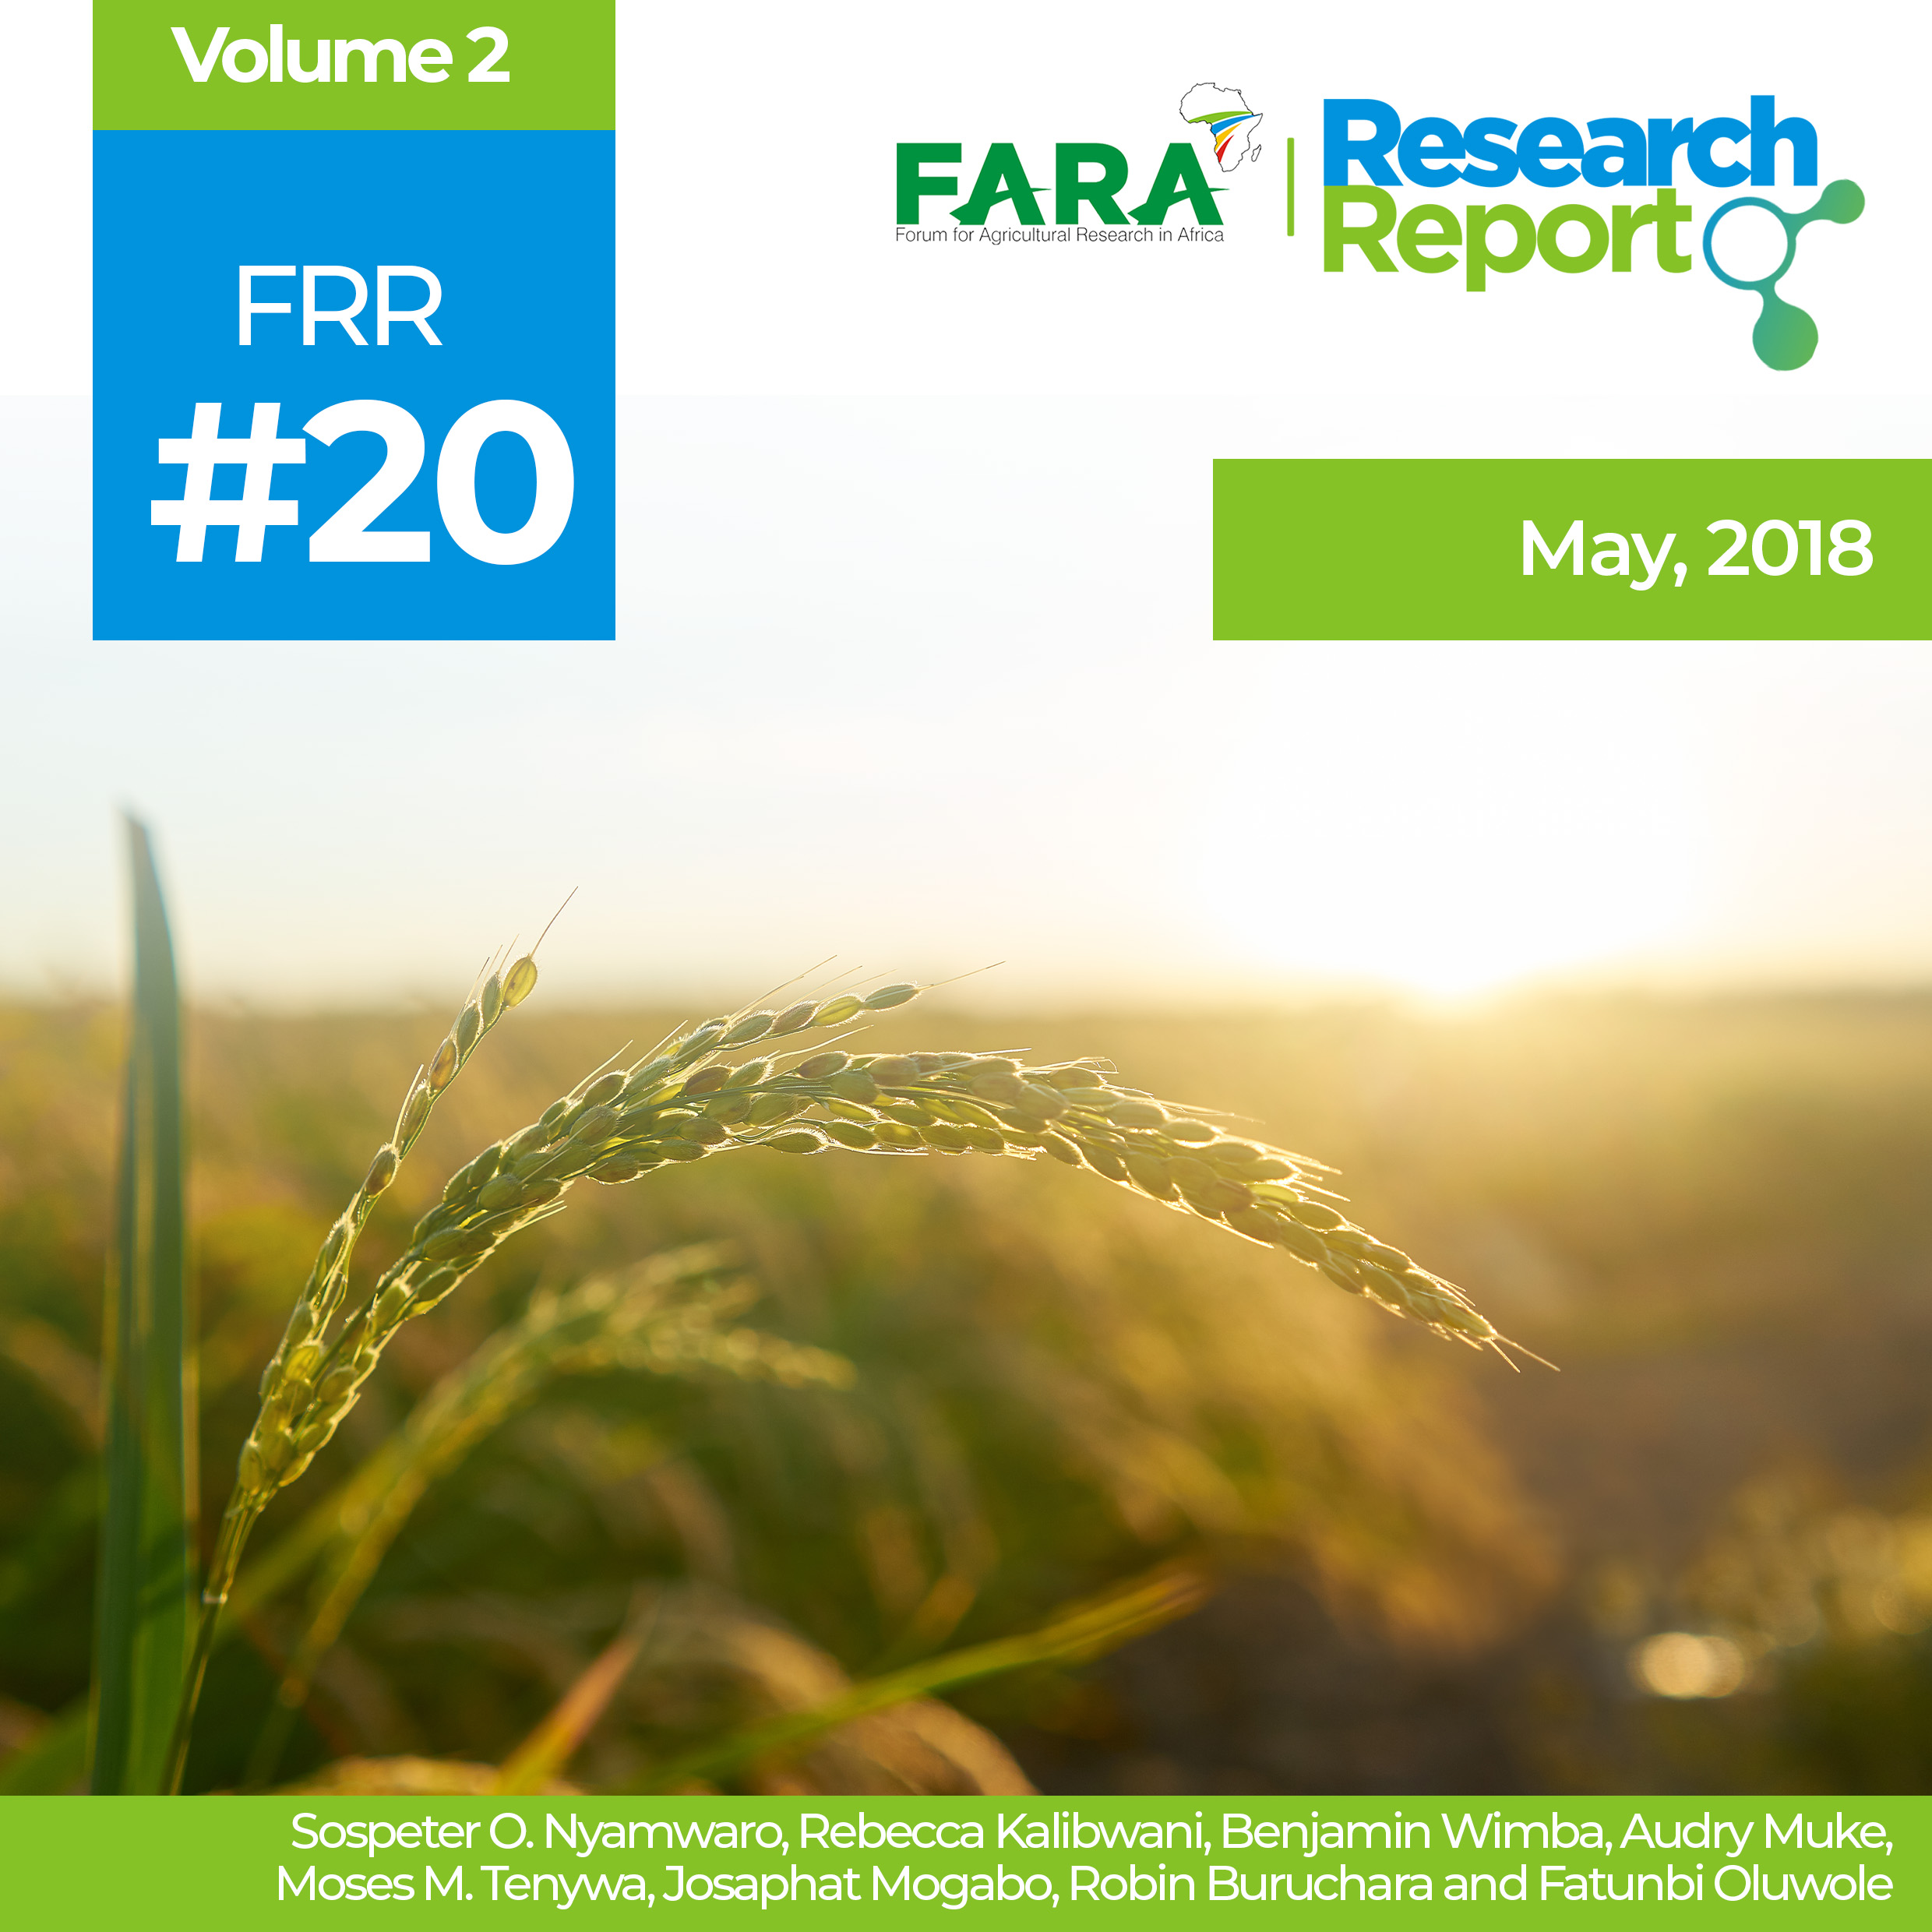 Innovation Opportunities in Bean Production in the DR Congo. FARA Research Reports Vol 2 (20): pp 16.